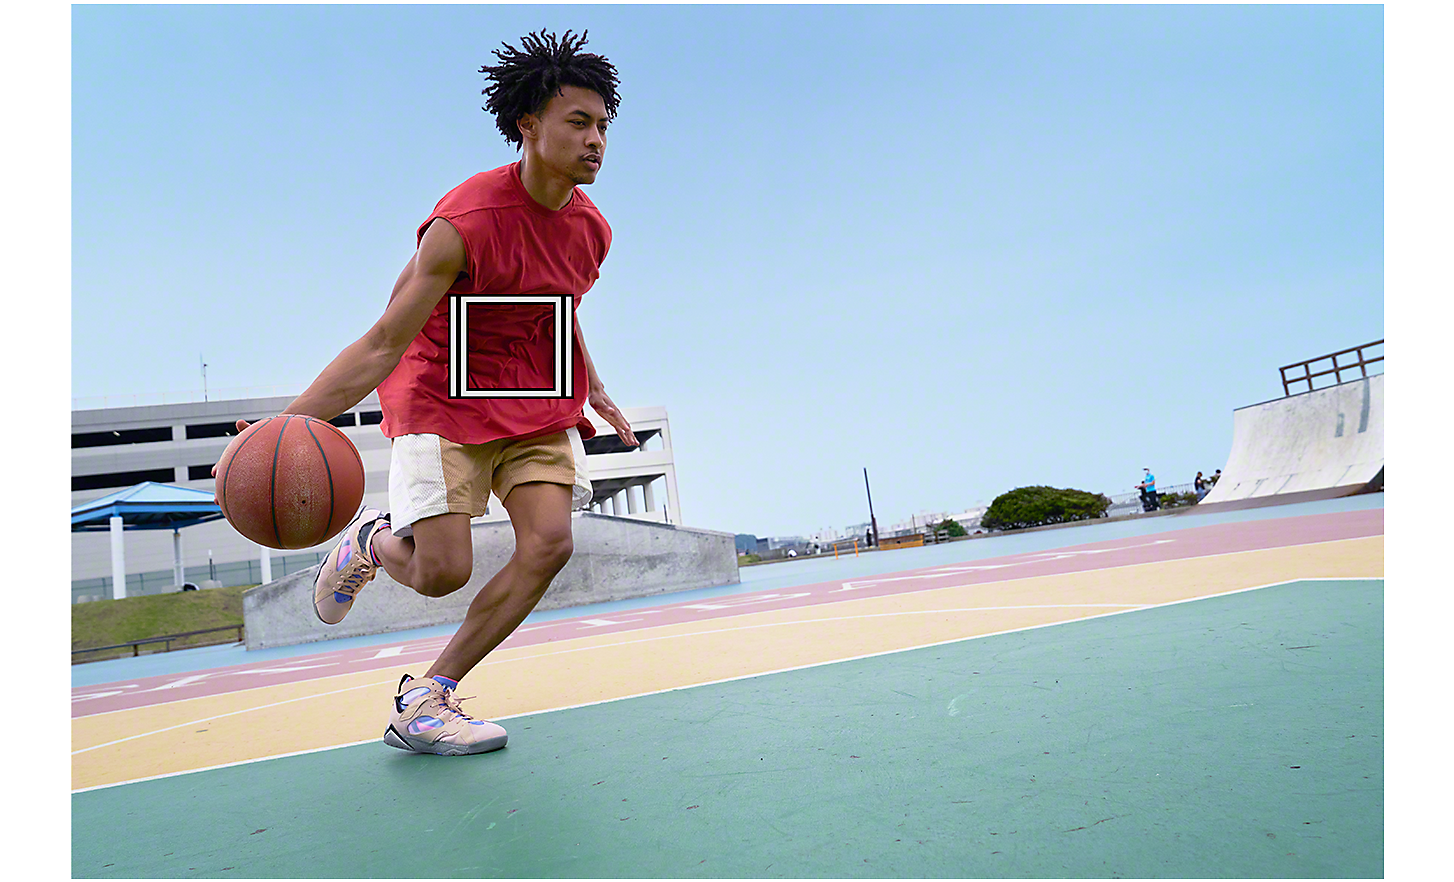 Man dribbling a basketball, a white square denoting Object Tracking